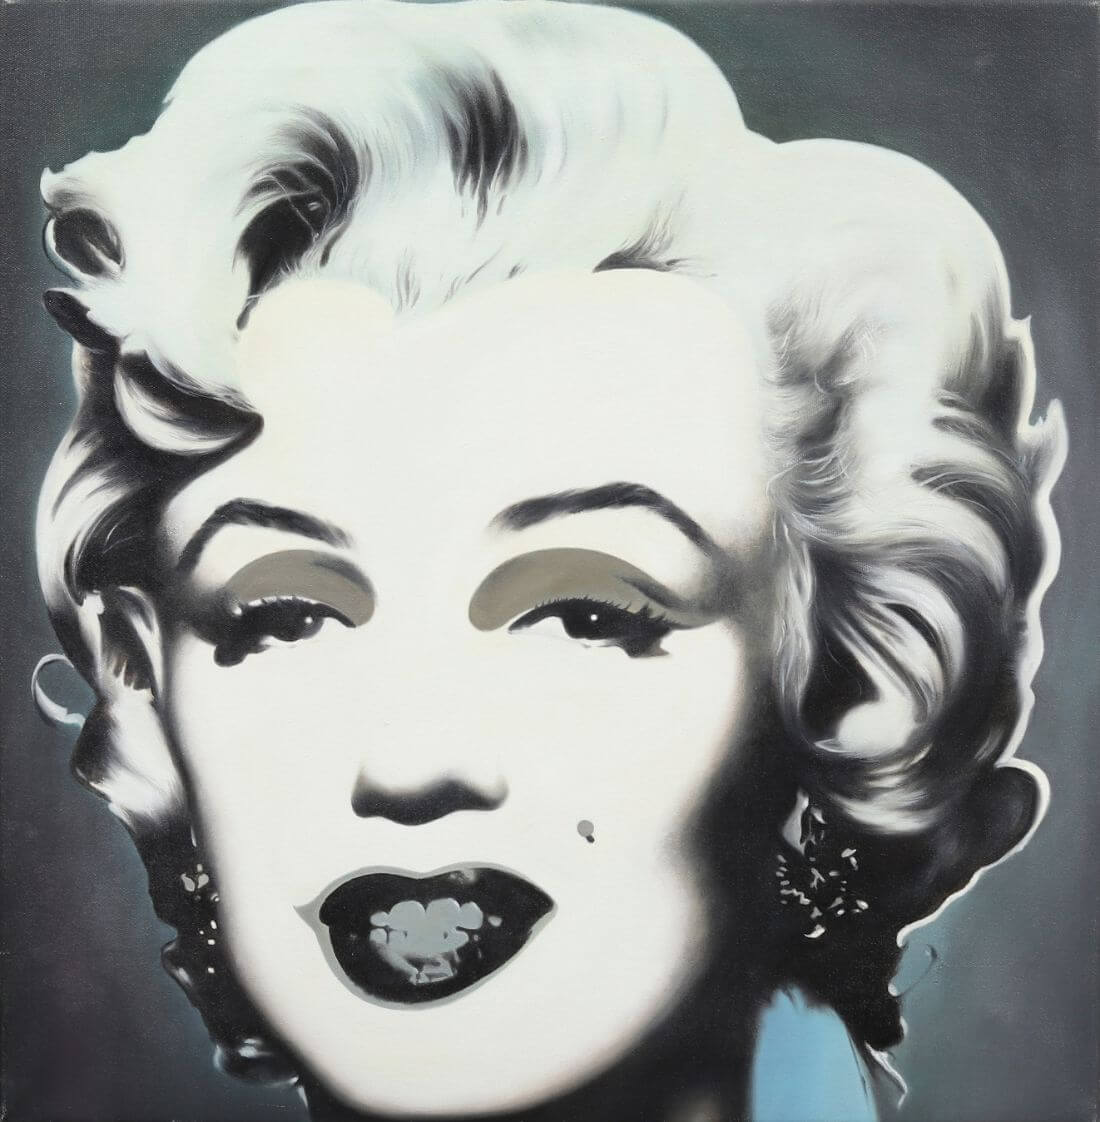 Marilyn Monroe (Monochrome) - Andy Warhol - Pop Art Masterpiece - Canvas Prints by Andy Warhol | Buy Posters, Frames, Canvas & Digital Art Prints | Small, Compact, Medium and Large